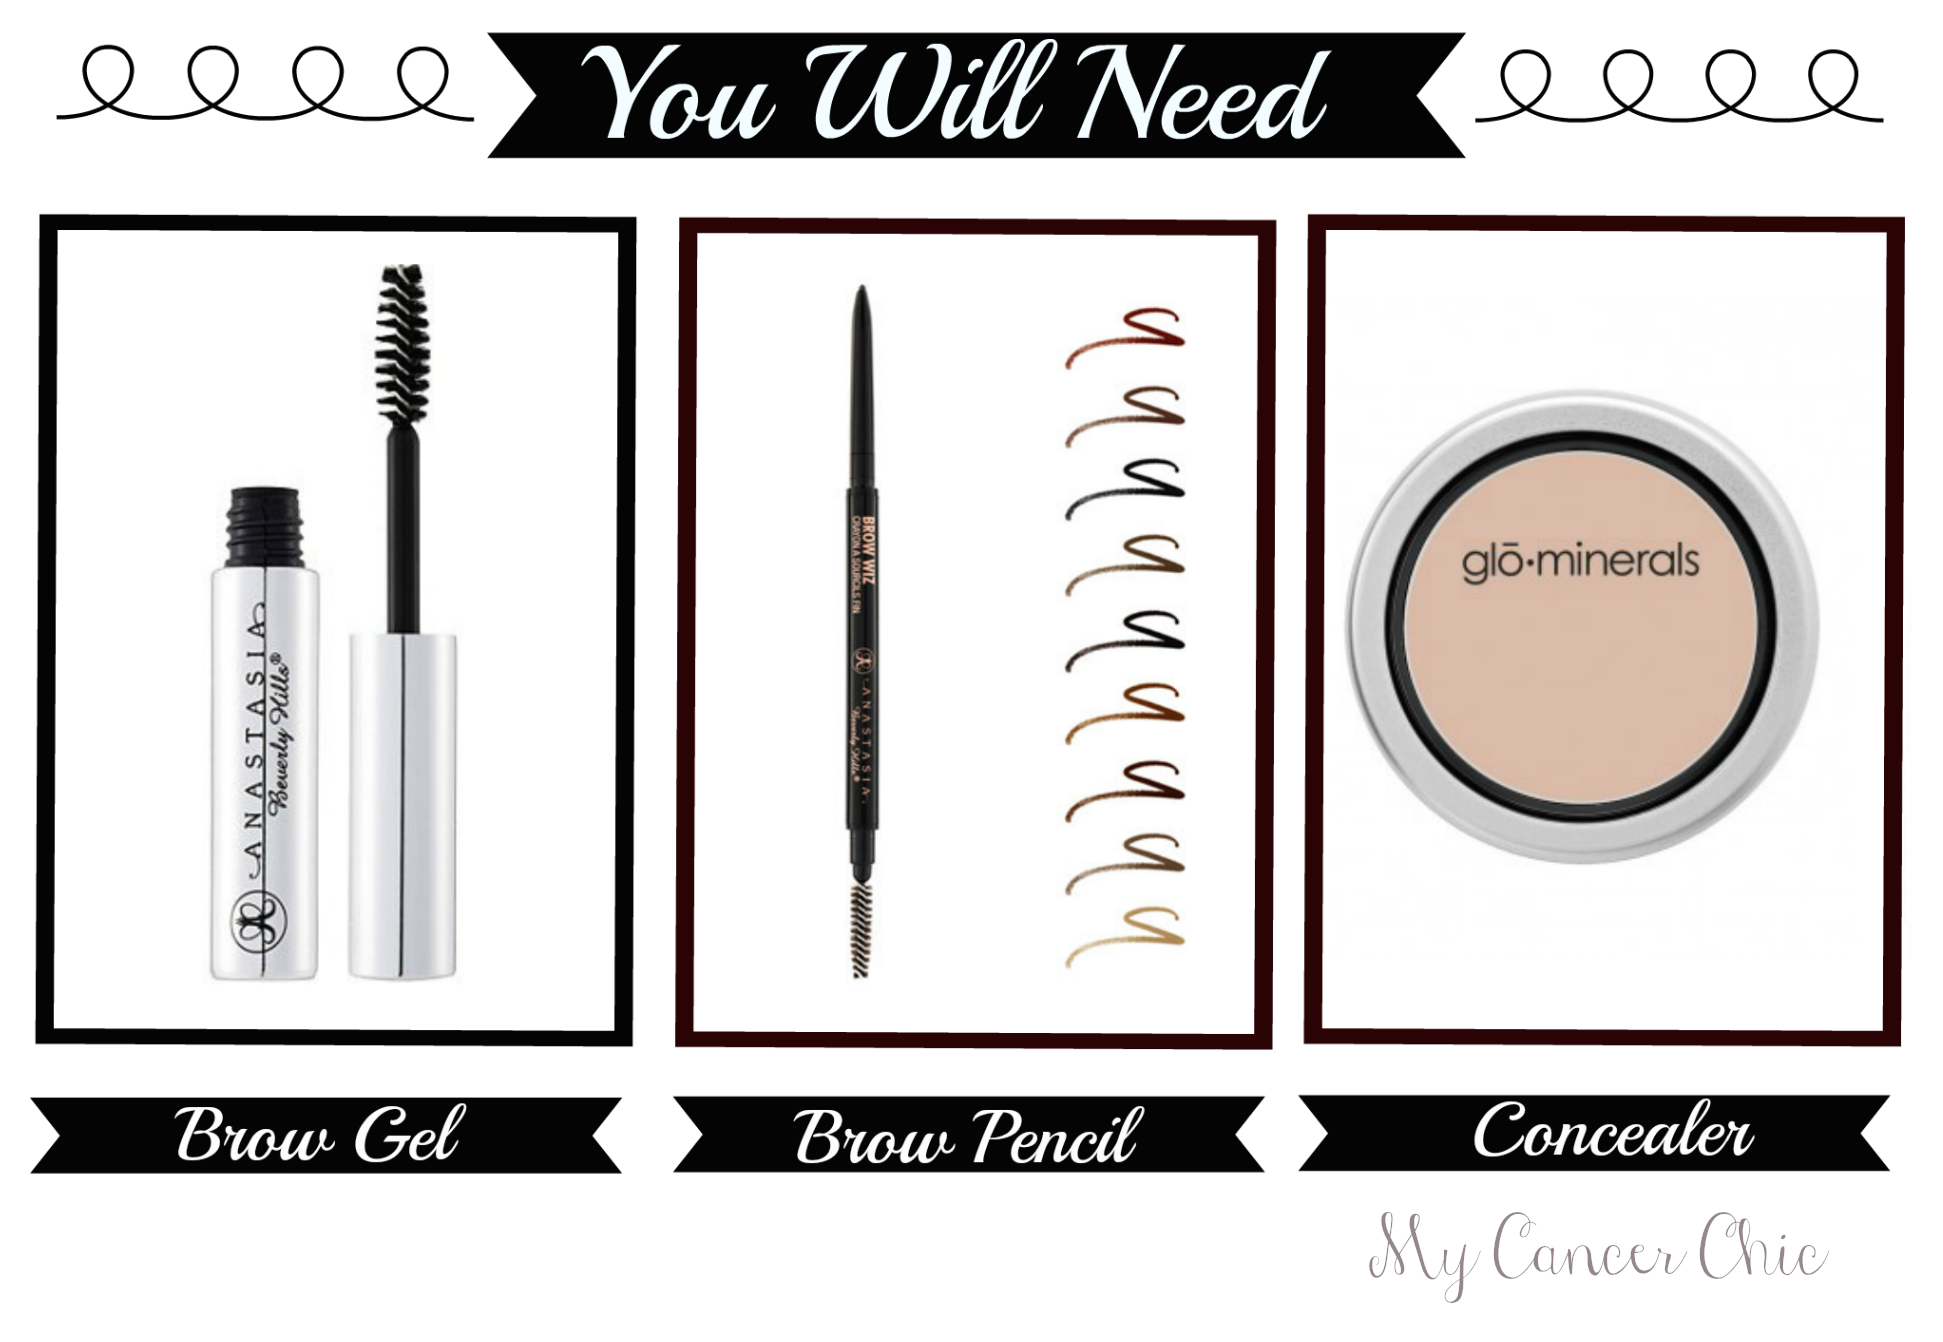 Natural Eyebrows products to create Brow Pencil, Brow Gel